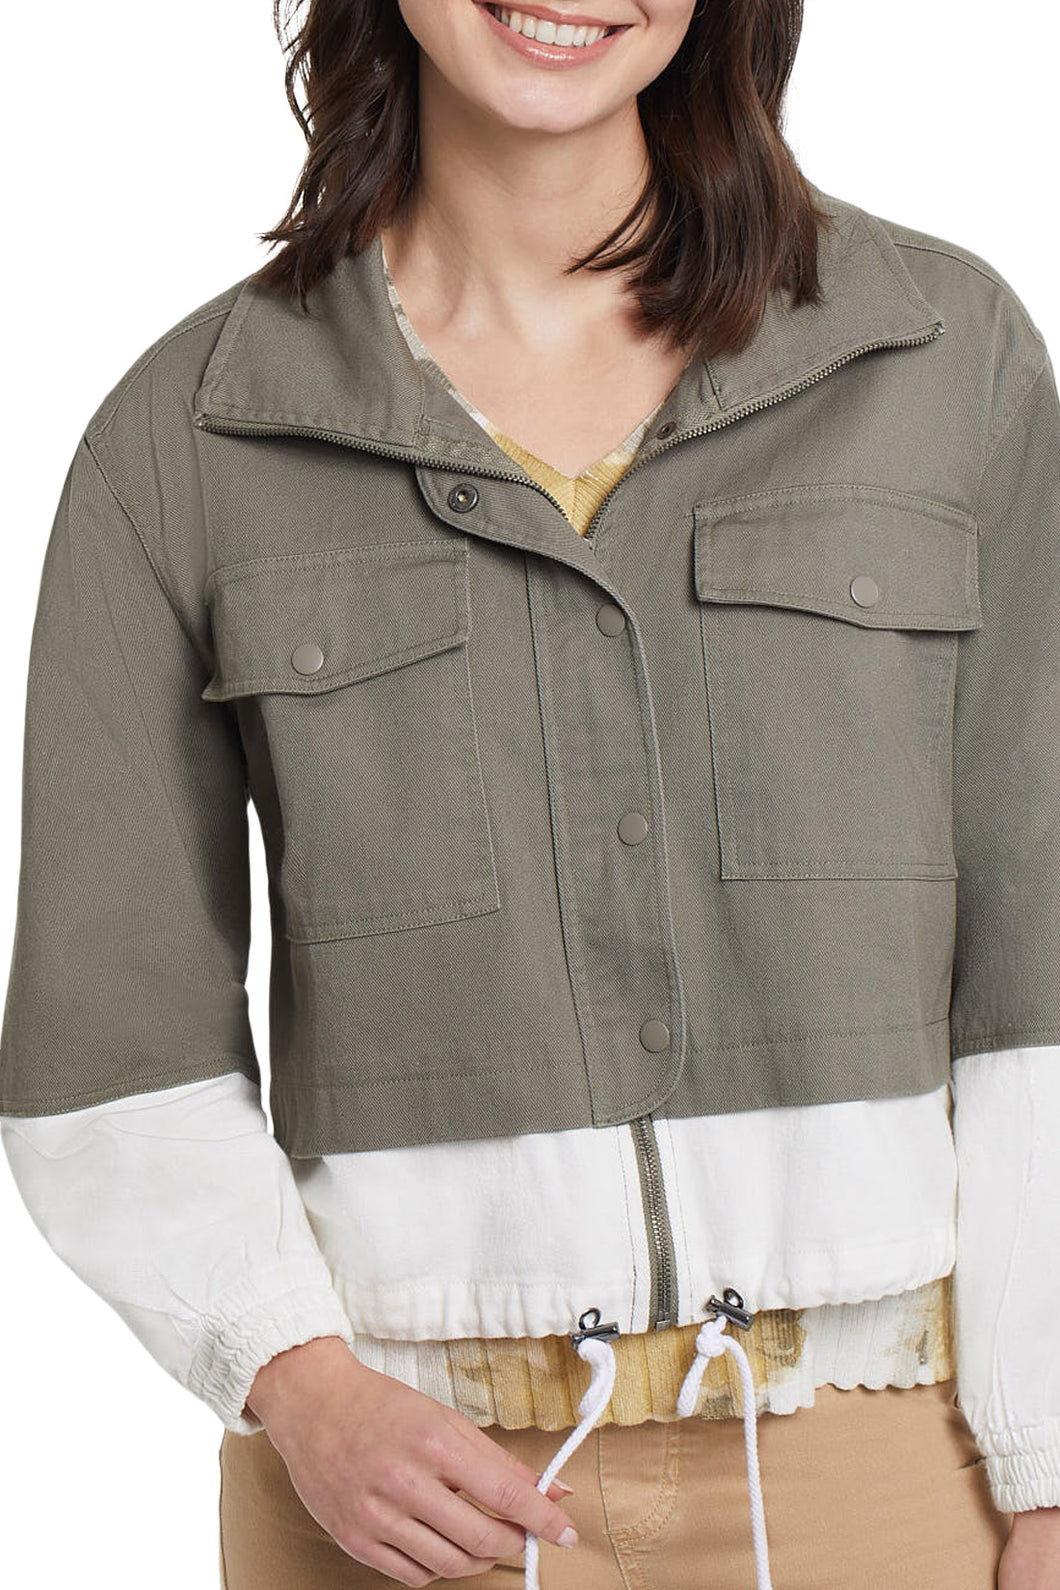 If you are searching for a jacket with a fresh take on a simple style, our Meriam jacket in moss green is the jacket for you! With so many interesting details- hidden zippered placket, adjustable draw cord hem, stand up collar, drop shoulder sleeves with elastic cuffs and chest patch pockets, this winning jacket will get you noticed! In addition, you are going to love the super soft cotton twill fabric.  Pair with our MECA LIGHTWEIGHT MOSS GREEN MESH TURTLENECK for the perfect look!